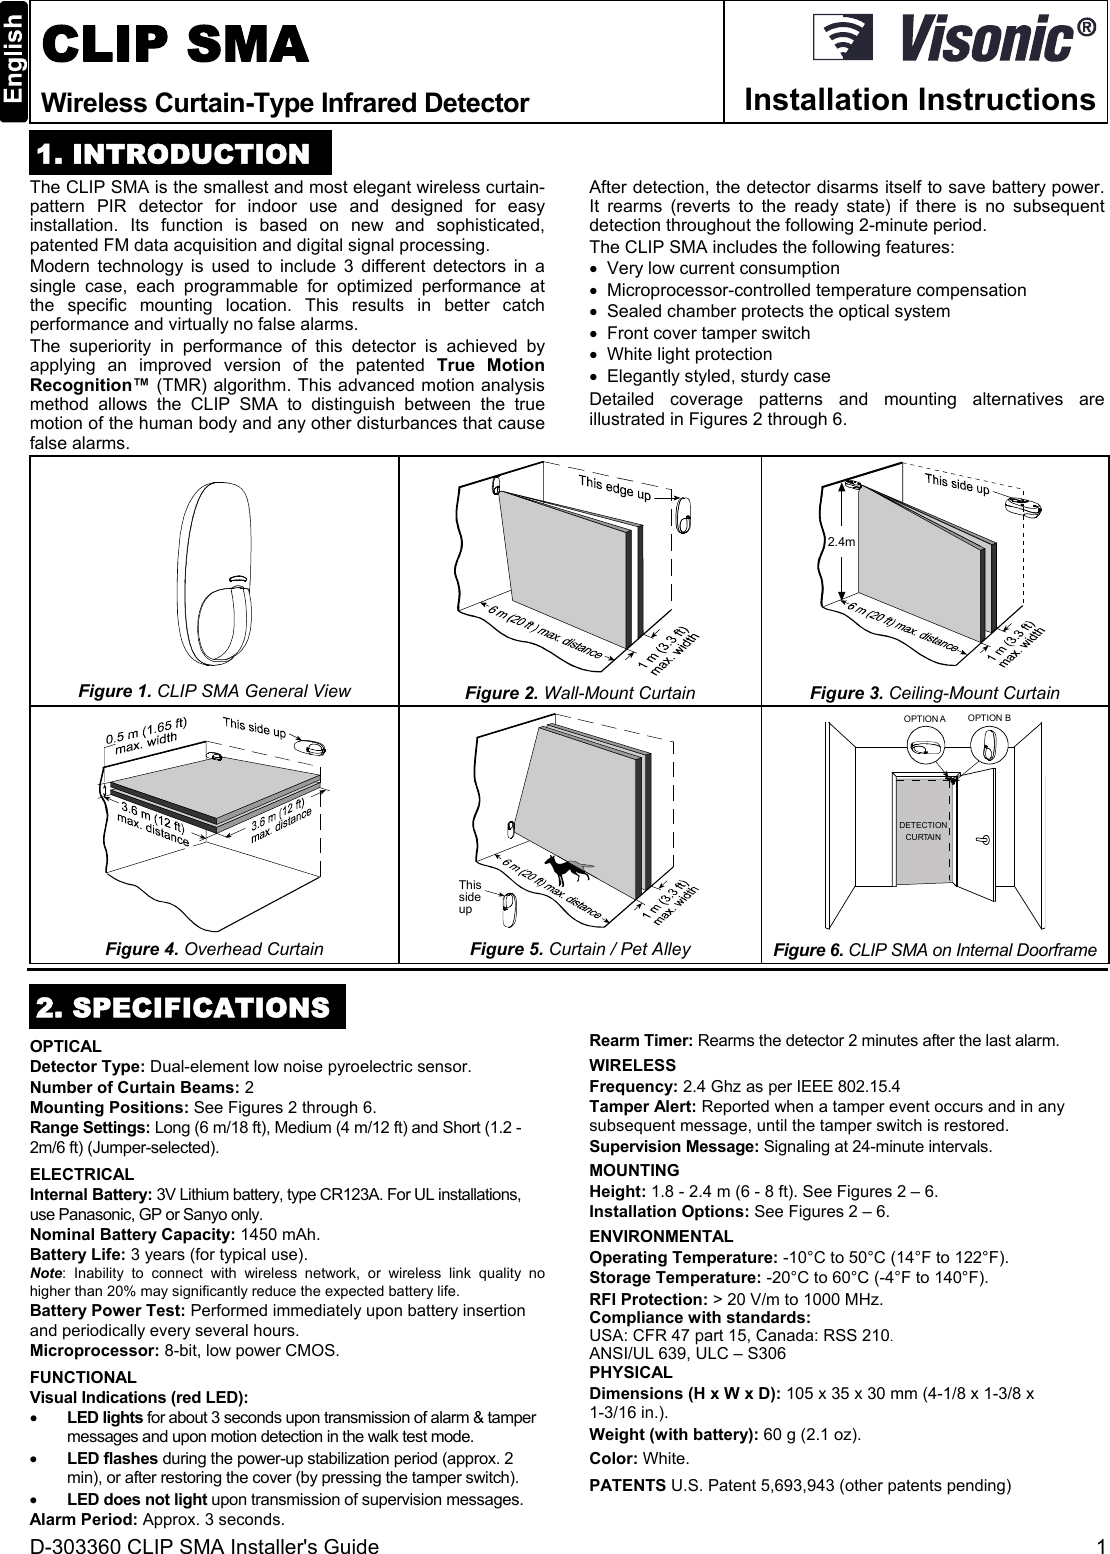 D-303360 CLIP SMA Installer&apos;s Guide  1  CLIP SMA Wireless Curtain-Type Infrared Detector  Installation Instructions 1. INTRODUCTION The CLIP SMA is the smallest and most elegant wireless curtain-pattern PIR detector for indoor use and designed for easy installation. Its function is based on new and sophisticated, patented FM data acquisition and digital signal processing.  Modern technology is used to include 3 different detectors in a single case, each programmable for optimized performance at the specific mounting location. This results in better catch performance and virtually no false alarms. The superiority in performance of this detector is achieved by applying an improved version of the patented True Motion Recognition™ (TMR) algorithm. This advanced motion analysis method allows the CLIP SMA to distinguish between the true motion of the human body and any other disturbances that cause false alarms.  After detection, the detector disarms itself to save battery power. It rearms (reverts to the ready state) if there is no subsequent detection throughout the following 2-minute period. The CLIP SMA includes the following features:   Very low current consumption   Microprocessor-controlled temperature compensation   Sealed chamber protects the optical system   Front cover tamper switch   White light protection   Elegantly styled, sturdy case Detailed coverage patterns and mounting alternatives are illustrated in Figures 2 through 6.  Figure 1. CLIP SMA General View   Figure 2. Wall-Mount Curtain 2.4m Figure 3. Ceiling-Mount Curtain  Figure 4. Overhead Curtain Thissideup  Figure 5. Curtain / Pet Alley OPTION A OPTION BDETECTIONCURTAIN Figure 6. CLIP SMA on Internal Doorframe  2. SPECIFICATIONS OPTICAL Detector Type: Dual-element low noise pyroelectric sensor. Number of Curtain Beams: 2 Mounting Positions: See Figures 2 through 6. Range Settings: Long (6 m/18 ft), Medium (4 m/12 ft) and Short (1.2 - 2m/6 ft) (Jumper-selected).  ELECTRICAL Internal Battery: 3V Lithium battery, type CR123A. For UL installations, use Panasonic, GP or Sanyo only. Nominal Battery Capacity: 1450 mAh. Battery Life: 3 years (for typical use). Note: Inability to connect with wireless network, or wireless link quality no higher than 20% may significantly reduce the expected battery life. Battery Power Test: Performed immediately upon battery insertion and periodically every several hours. Microprocessor: 8-bit, low power CMOS. FUNCTIONAL Visual Indications (red LED):   LED lights for about 3 seconds upon transmission of alarm &amp; tamper messages and upon motion detection in the walk test mode.   LED flashes during the power-up stabilization period (approx. 2 min), or after restoring the cover (by pressing the tamper switch).  LED does not light upon transmission of supervision messages. Alarm Period: Approx. 3 seconds. Rearm Timer: Rearms the detector 2 minutes after the last alarm.  WIRELESS Frequency: 2.4 Ghz as per IEEE 802.15.4  Tamper Alert: Reported when a tamper event occurs and in any subsequent message, until the tamper switch is restored. Supervision Message: Signaling at 24-minute intervals. MOUNTING  Height: 1.8 - 2.4 m (6 - 8 ft). See Figures 2 – 6. Installation Options: See Figures 2 – 6. ENVIRONMENTAL  Operating Temperature: -10°C to 50°C (14°F to 122°F).  Storage Temperature: -20°C to 60°C (-4°F to 140°F).  RFI Protection: &gt; 20 V/m to 1000 MHz.  Compliance with standards:  USA: CFR 47 part 15, Canada: RSS 210. ANSI/UL 639, ULC – S306 PHYSICAL  Dimensions (H x W x D): 105 x 35 x 30 mm (4-1/8 x 1-3/8 x  1-3/16 in.).  Weight (with battery): 60 g (2.1 oz).  Color: White. PATENTS U.S. Patent 5,693,943 (other patents pending) 